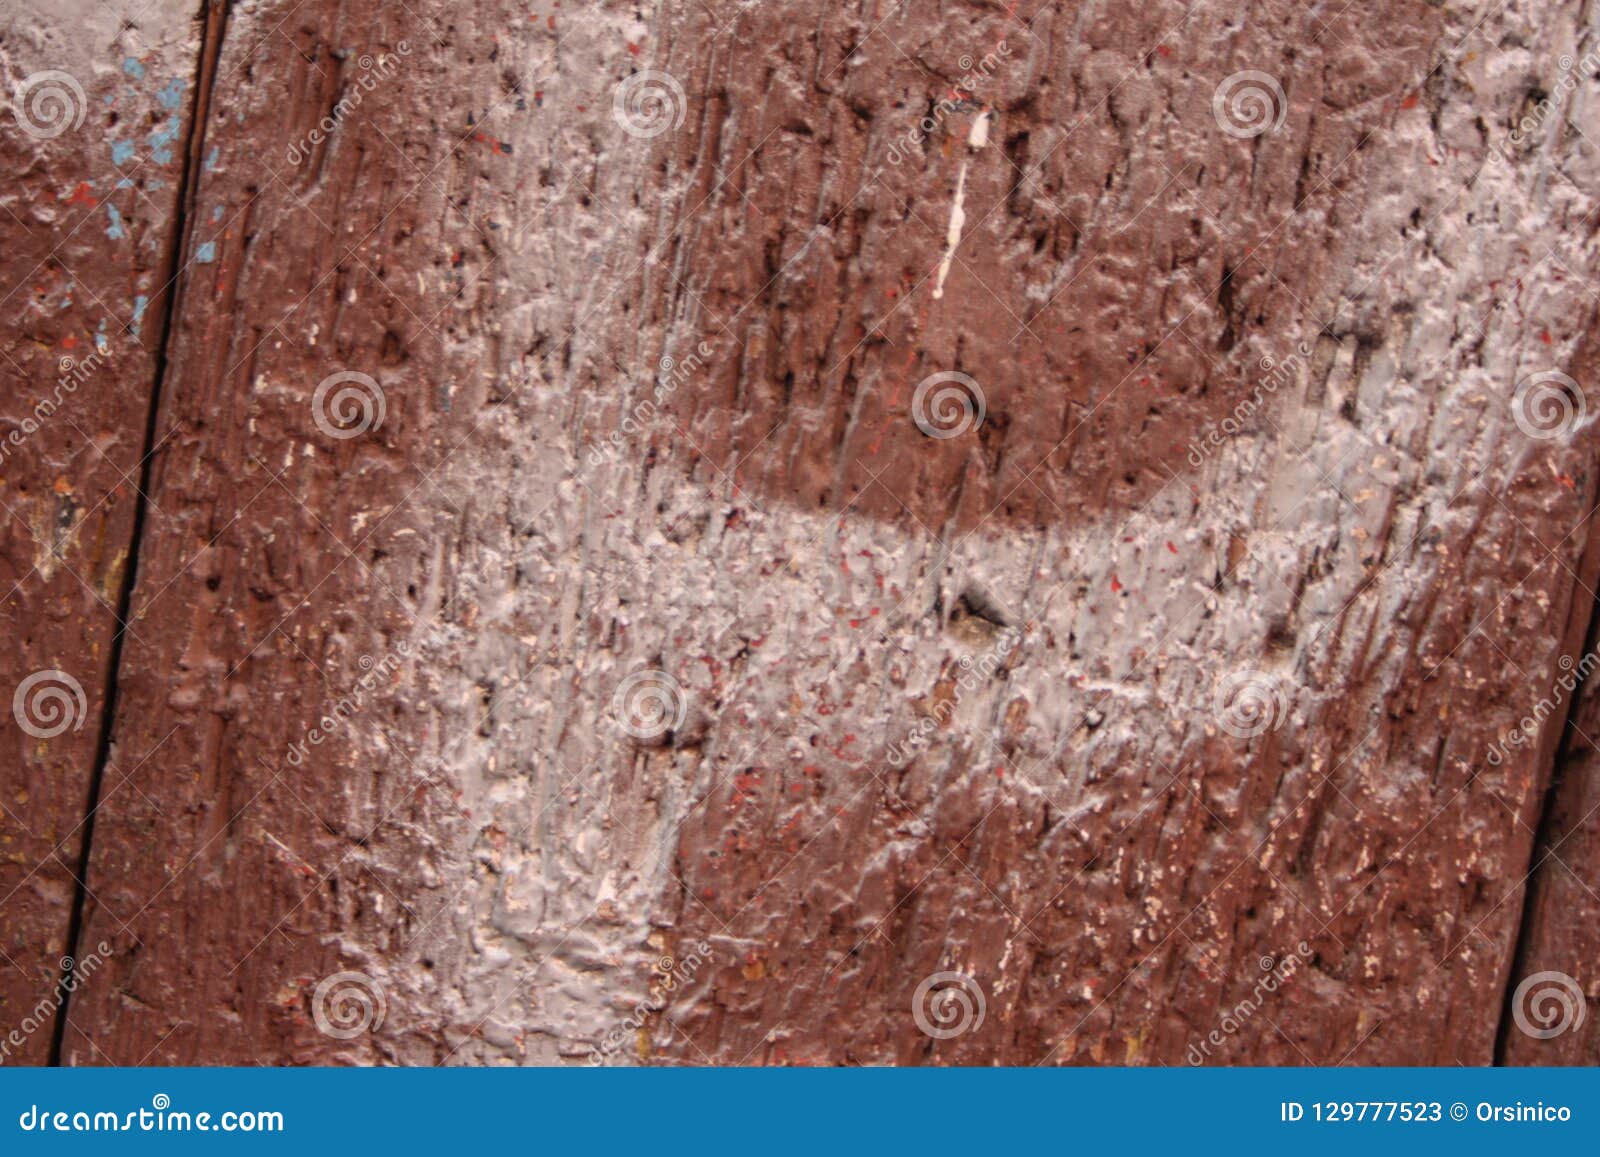 old, wood texture, with small pimples and veins of the wood itself